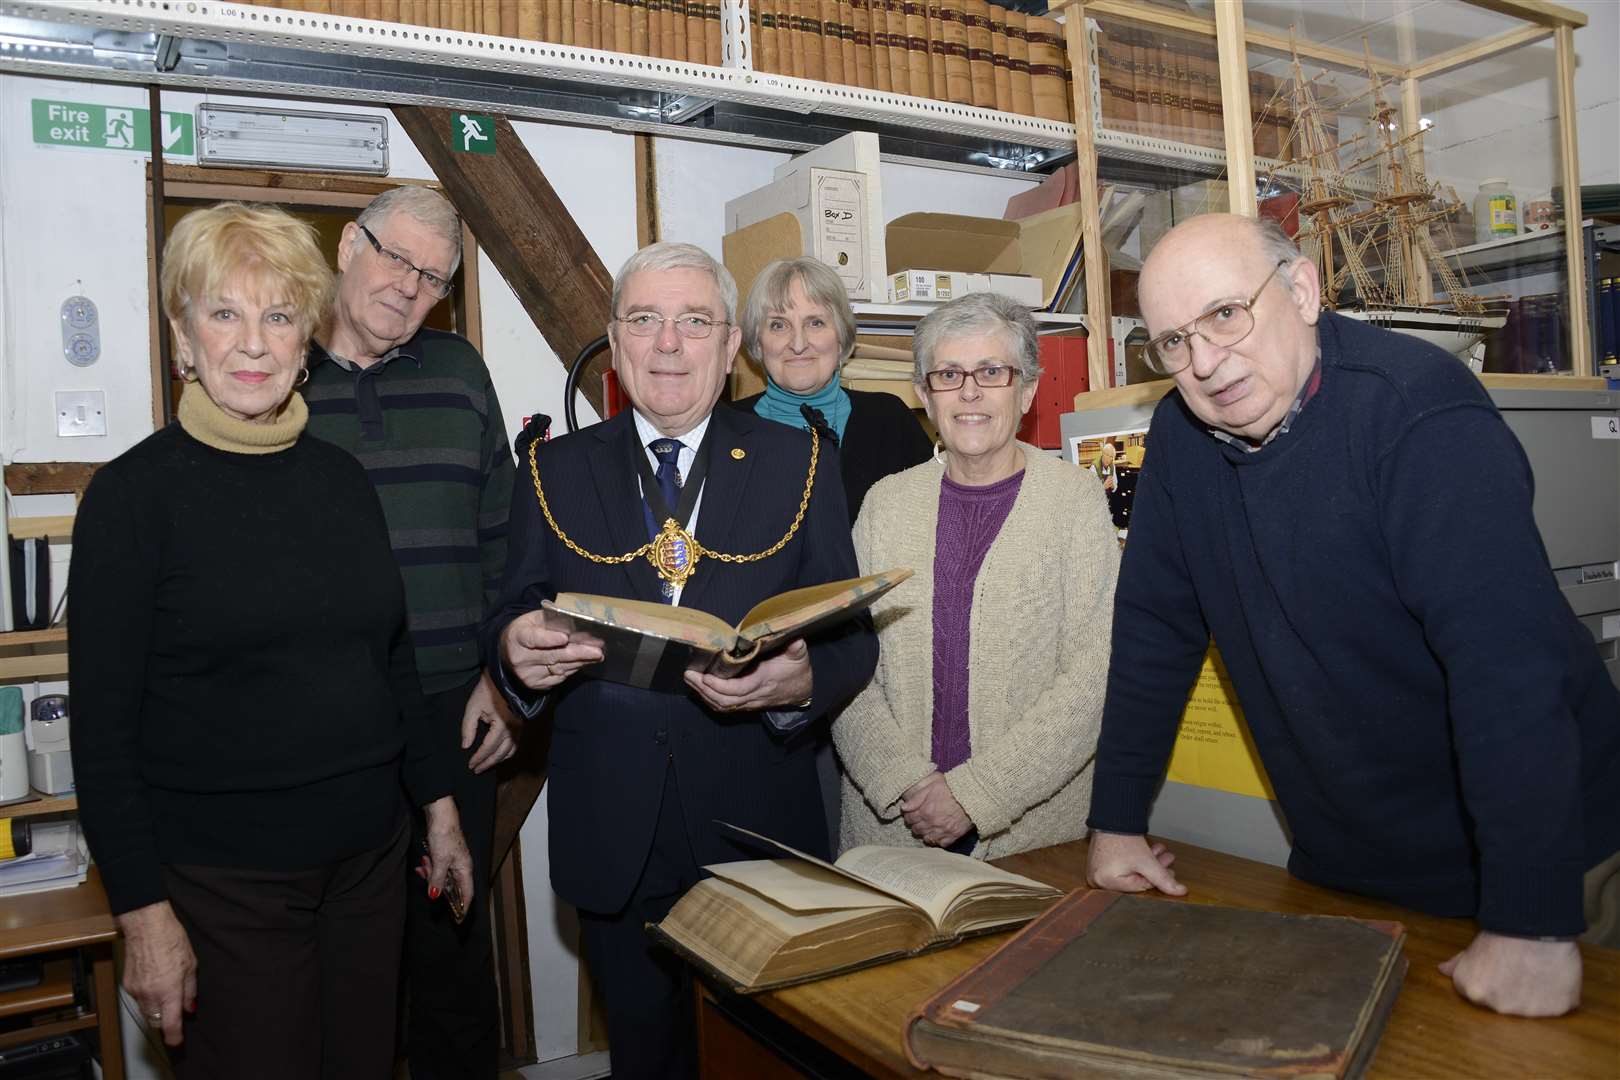 Mayor of Sandwich Cllr Paul Graeme with Hon Curator Ray Harlow and asst archivists June Edwards, John Hennessy, Mary Stewart and Linda Elliot